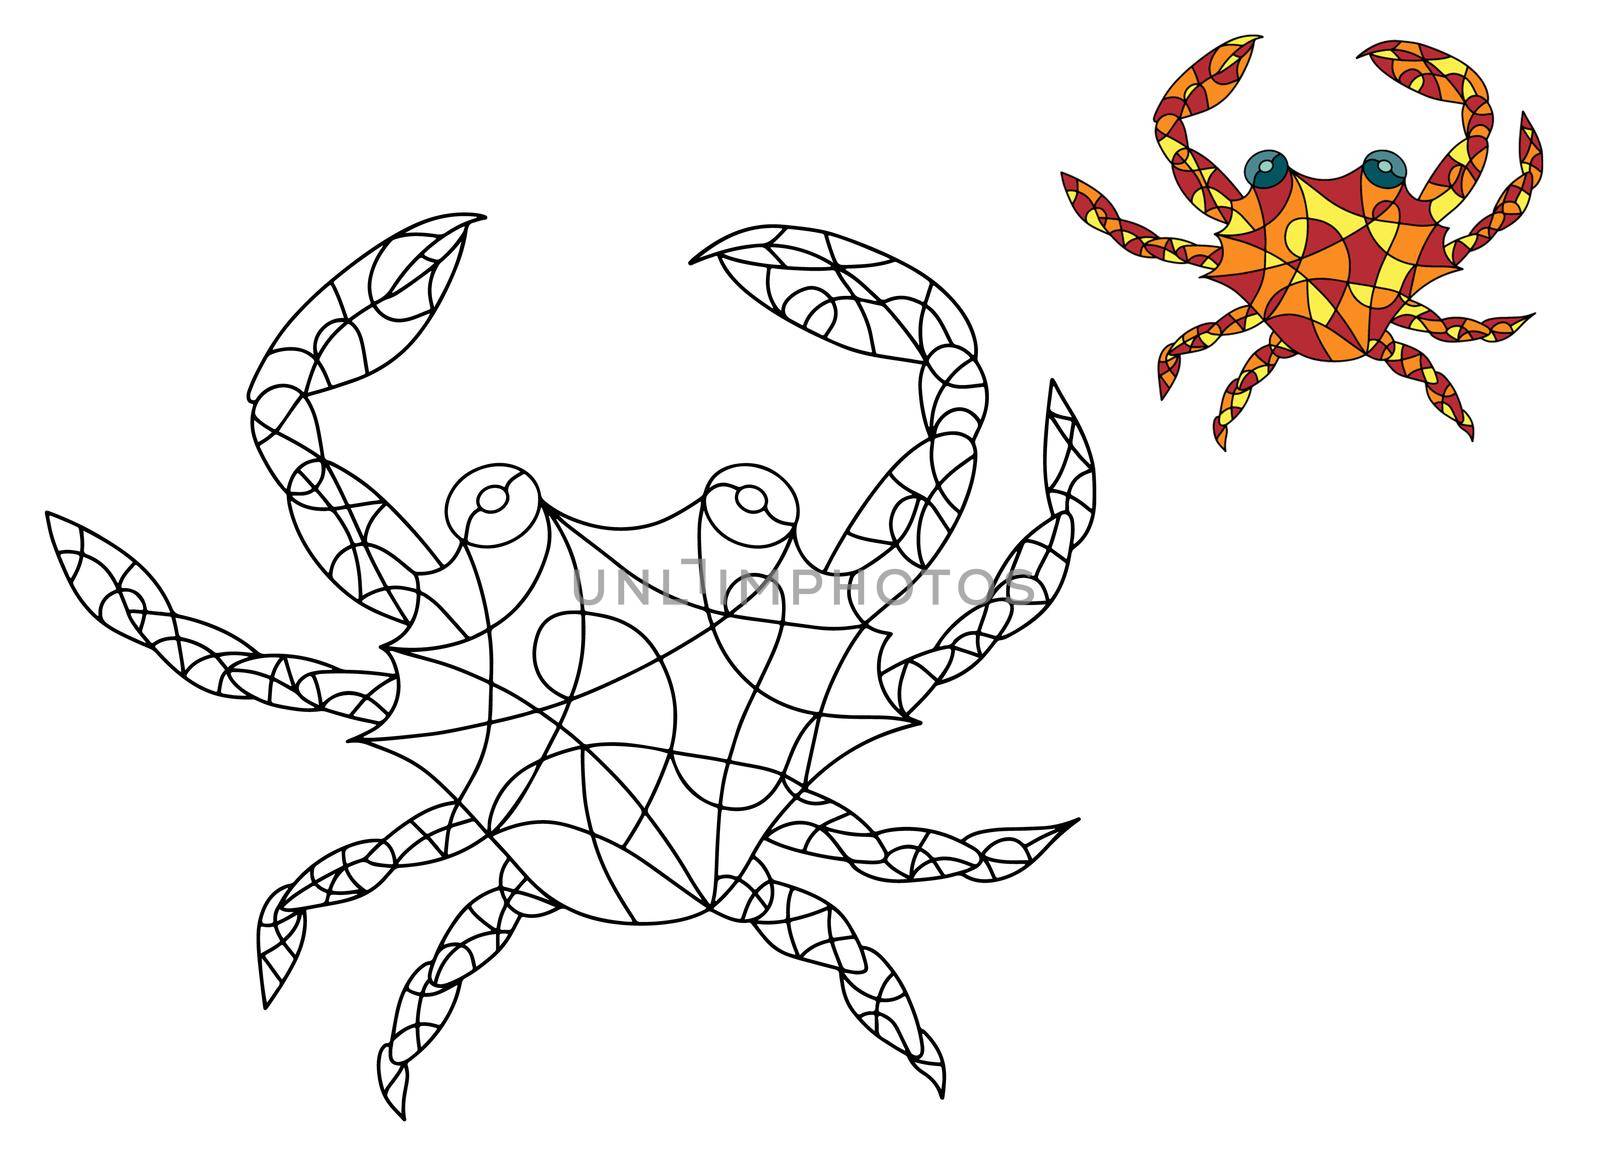 Black and White and Colored Illustration in stained glass style with abstract Crab. Image for Coloring Book, Coloring Page, Print, Batik and Window.